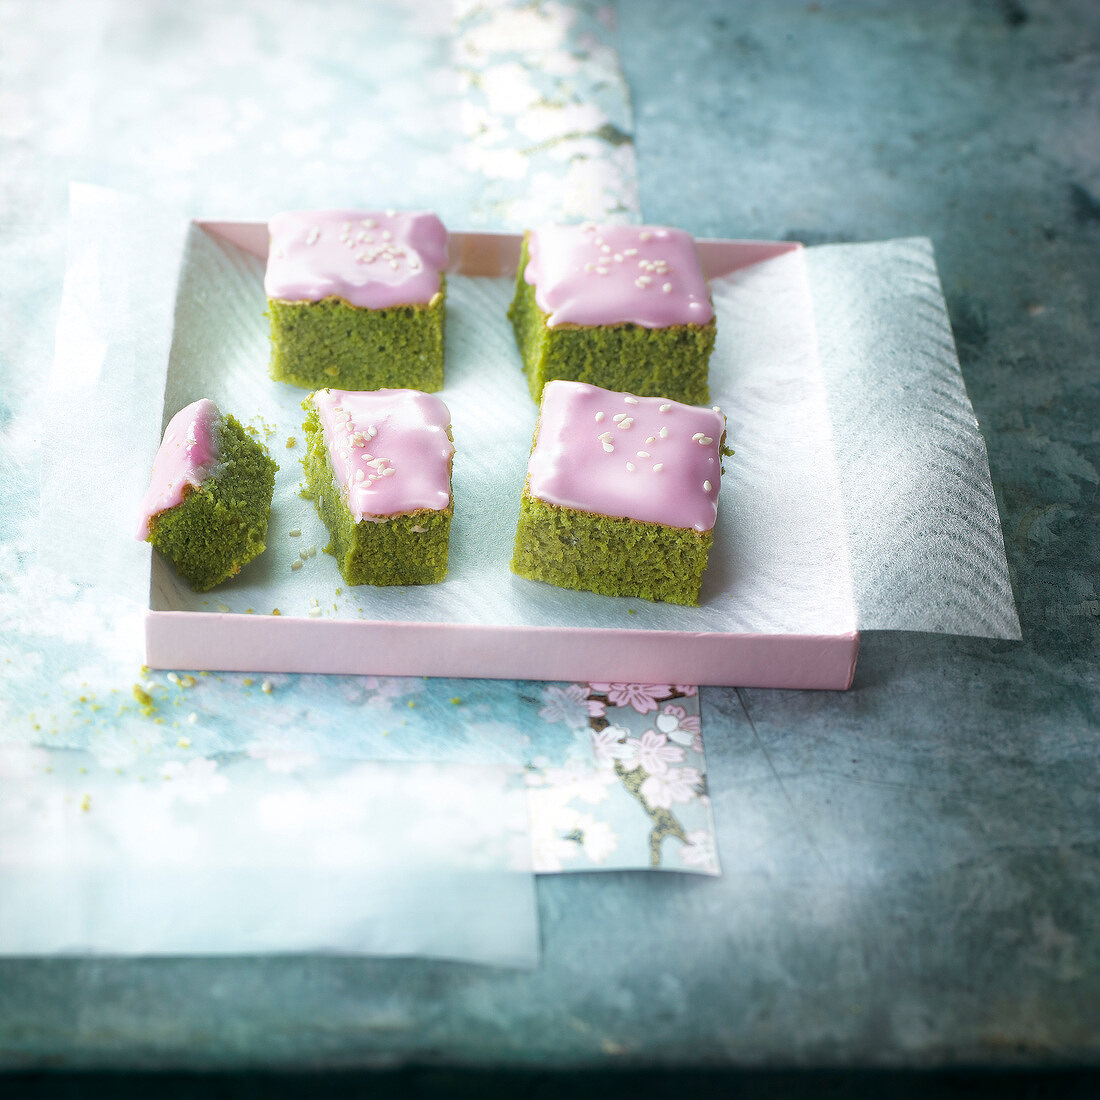 Cubes of geen tea cake with pink frosting